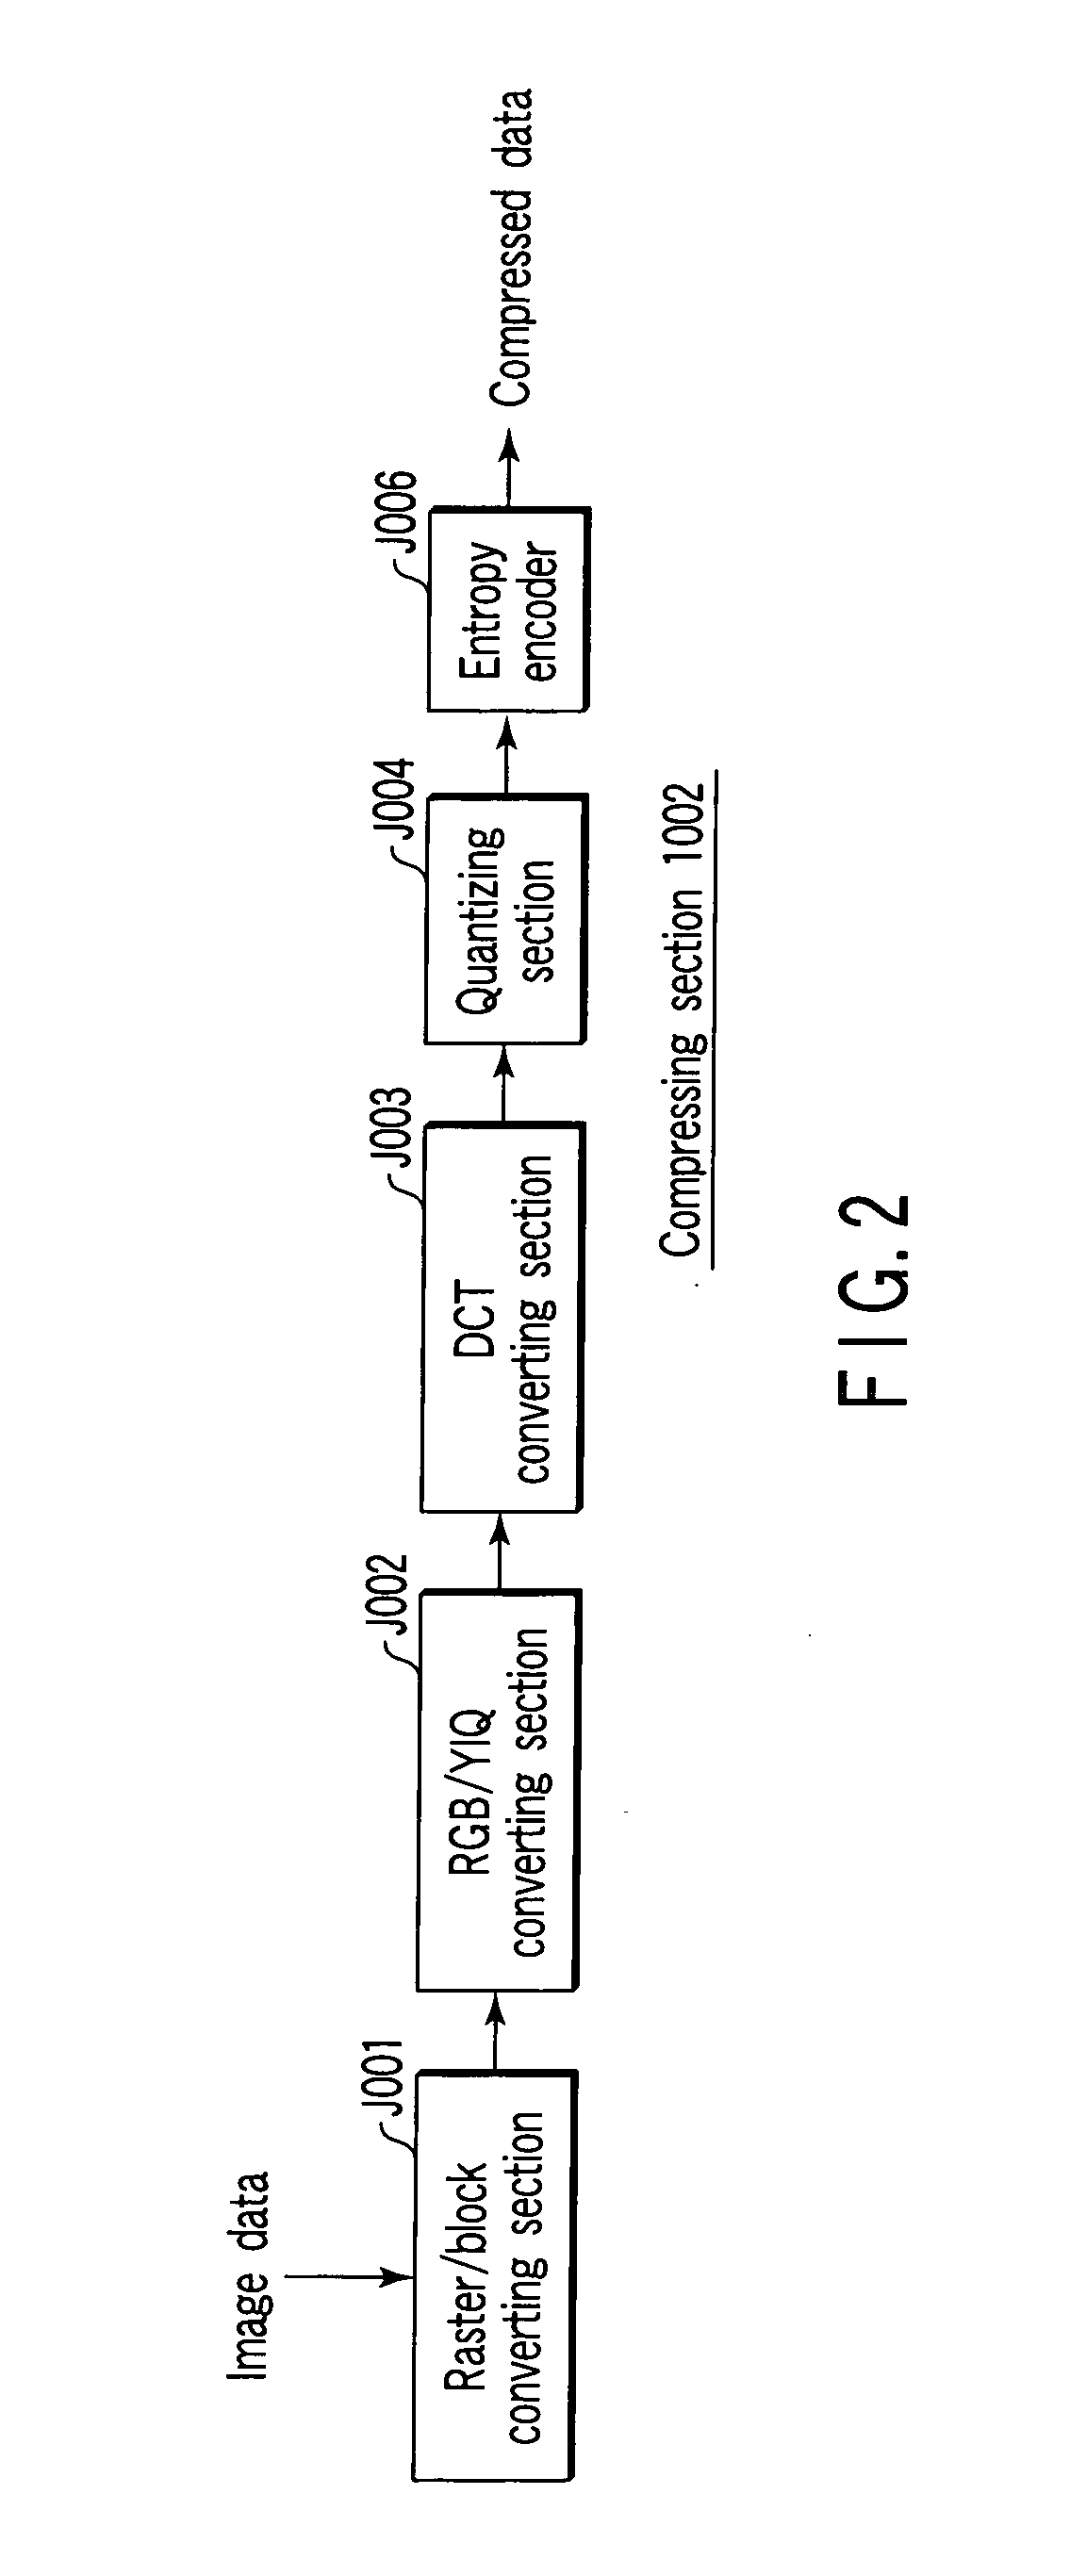 Apparatus for image processing